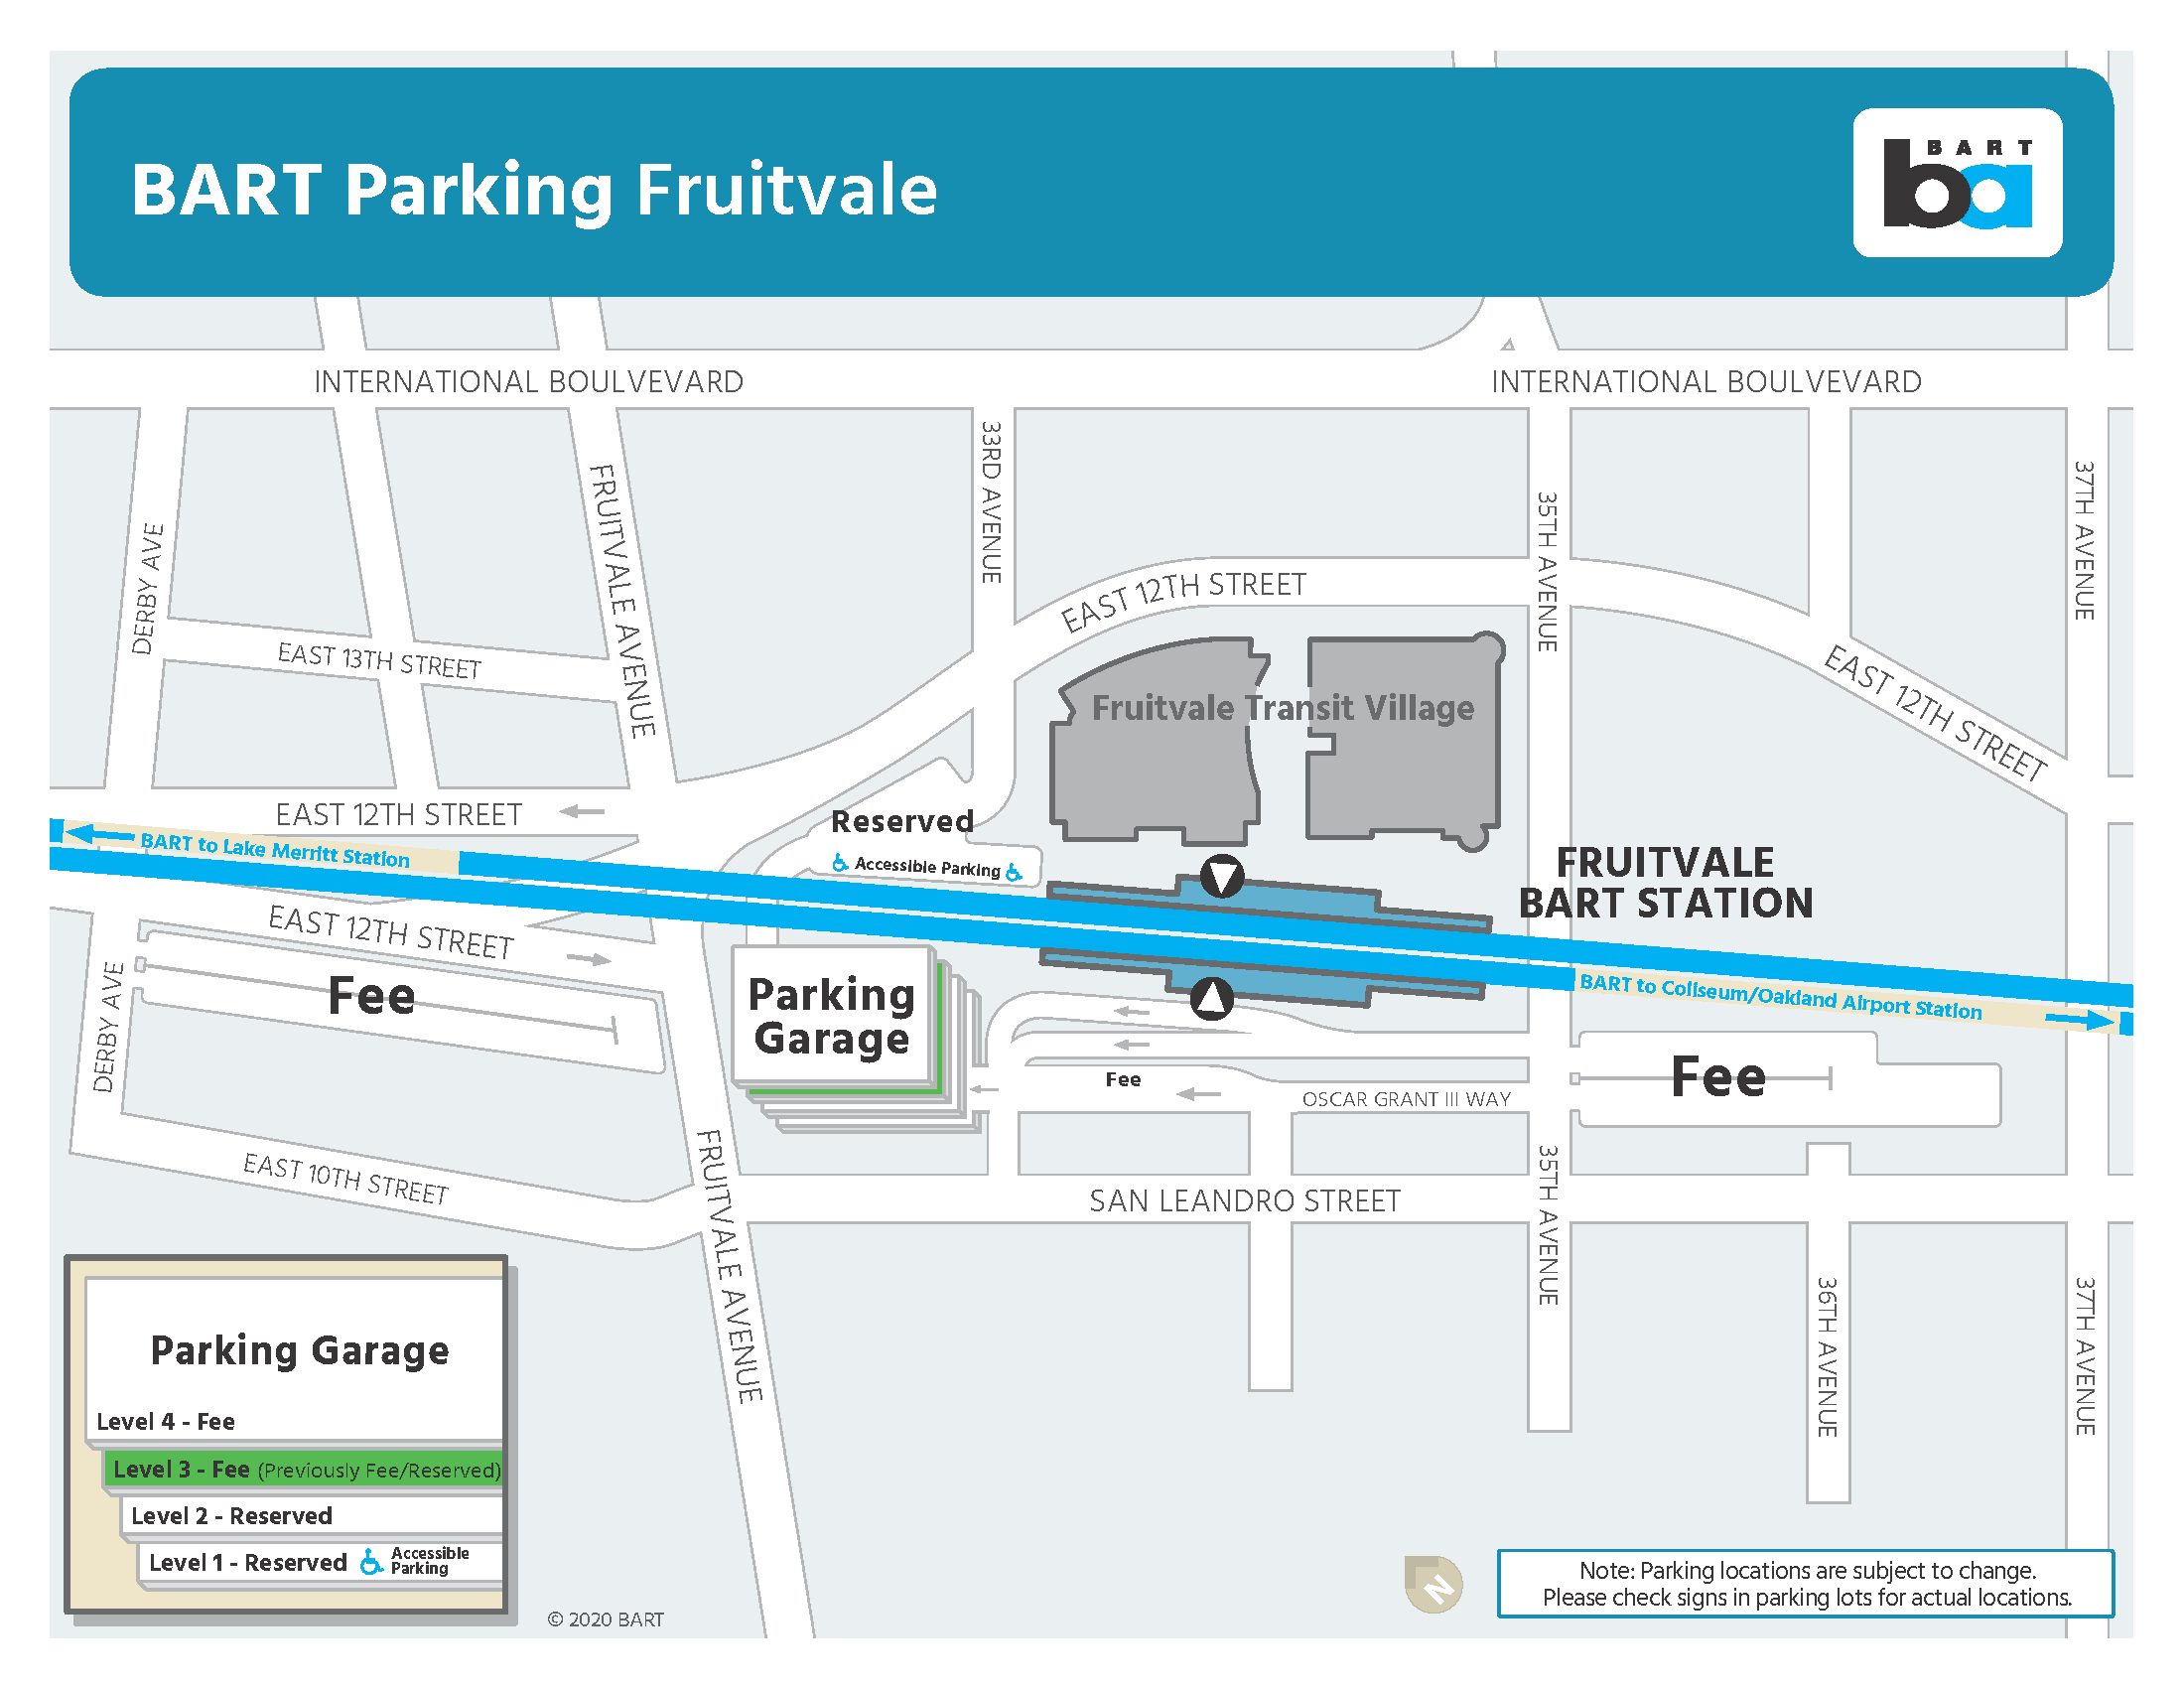 Parking areas at Fruitvale Station being reconfigured